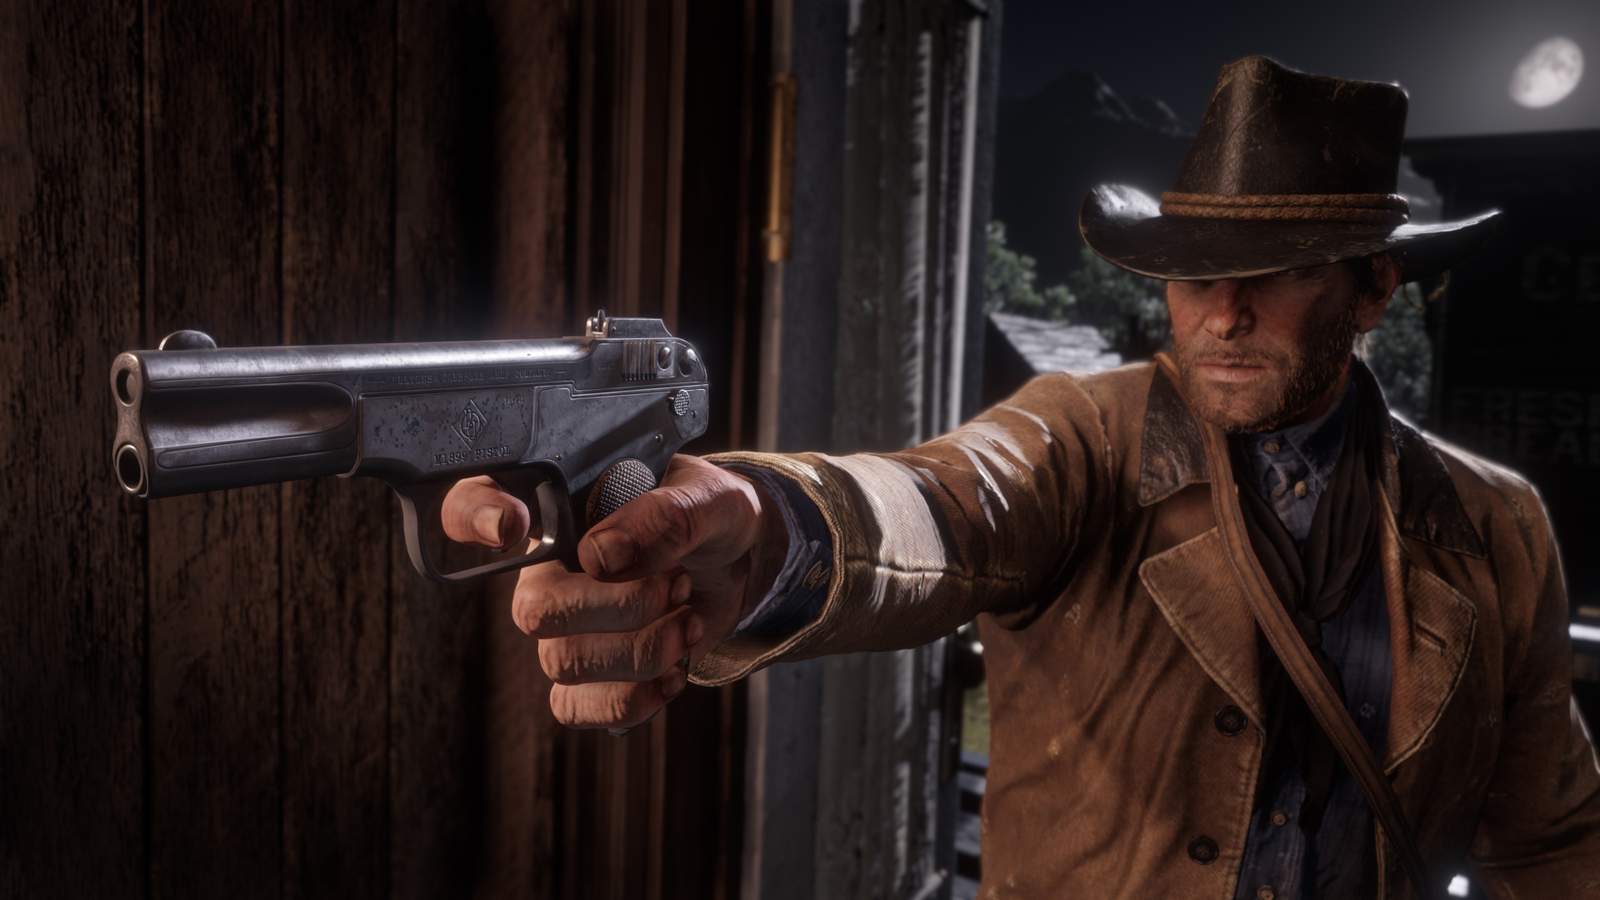 Dead Redemption 2 PC pre-order: where to buy it and what's included | Rock Paper Shotgun